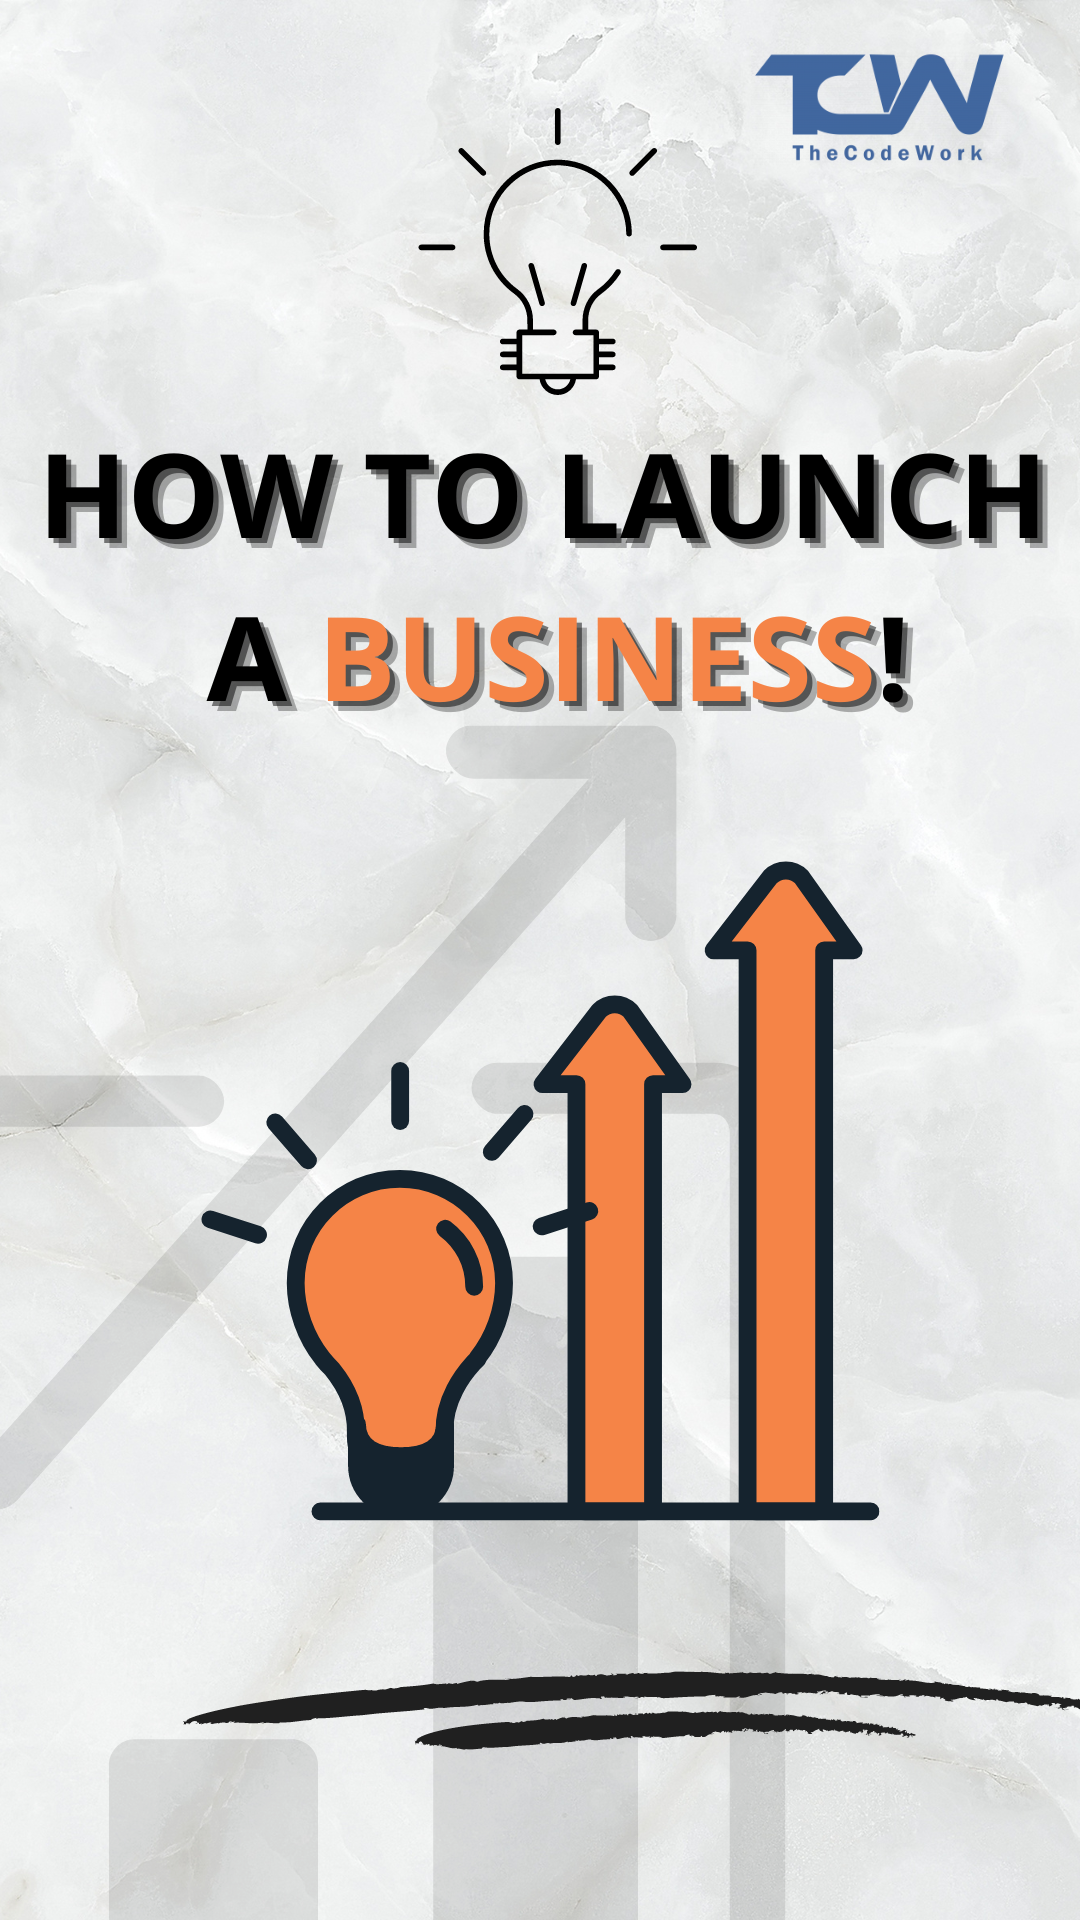 How To Launch a Business! 